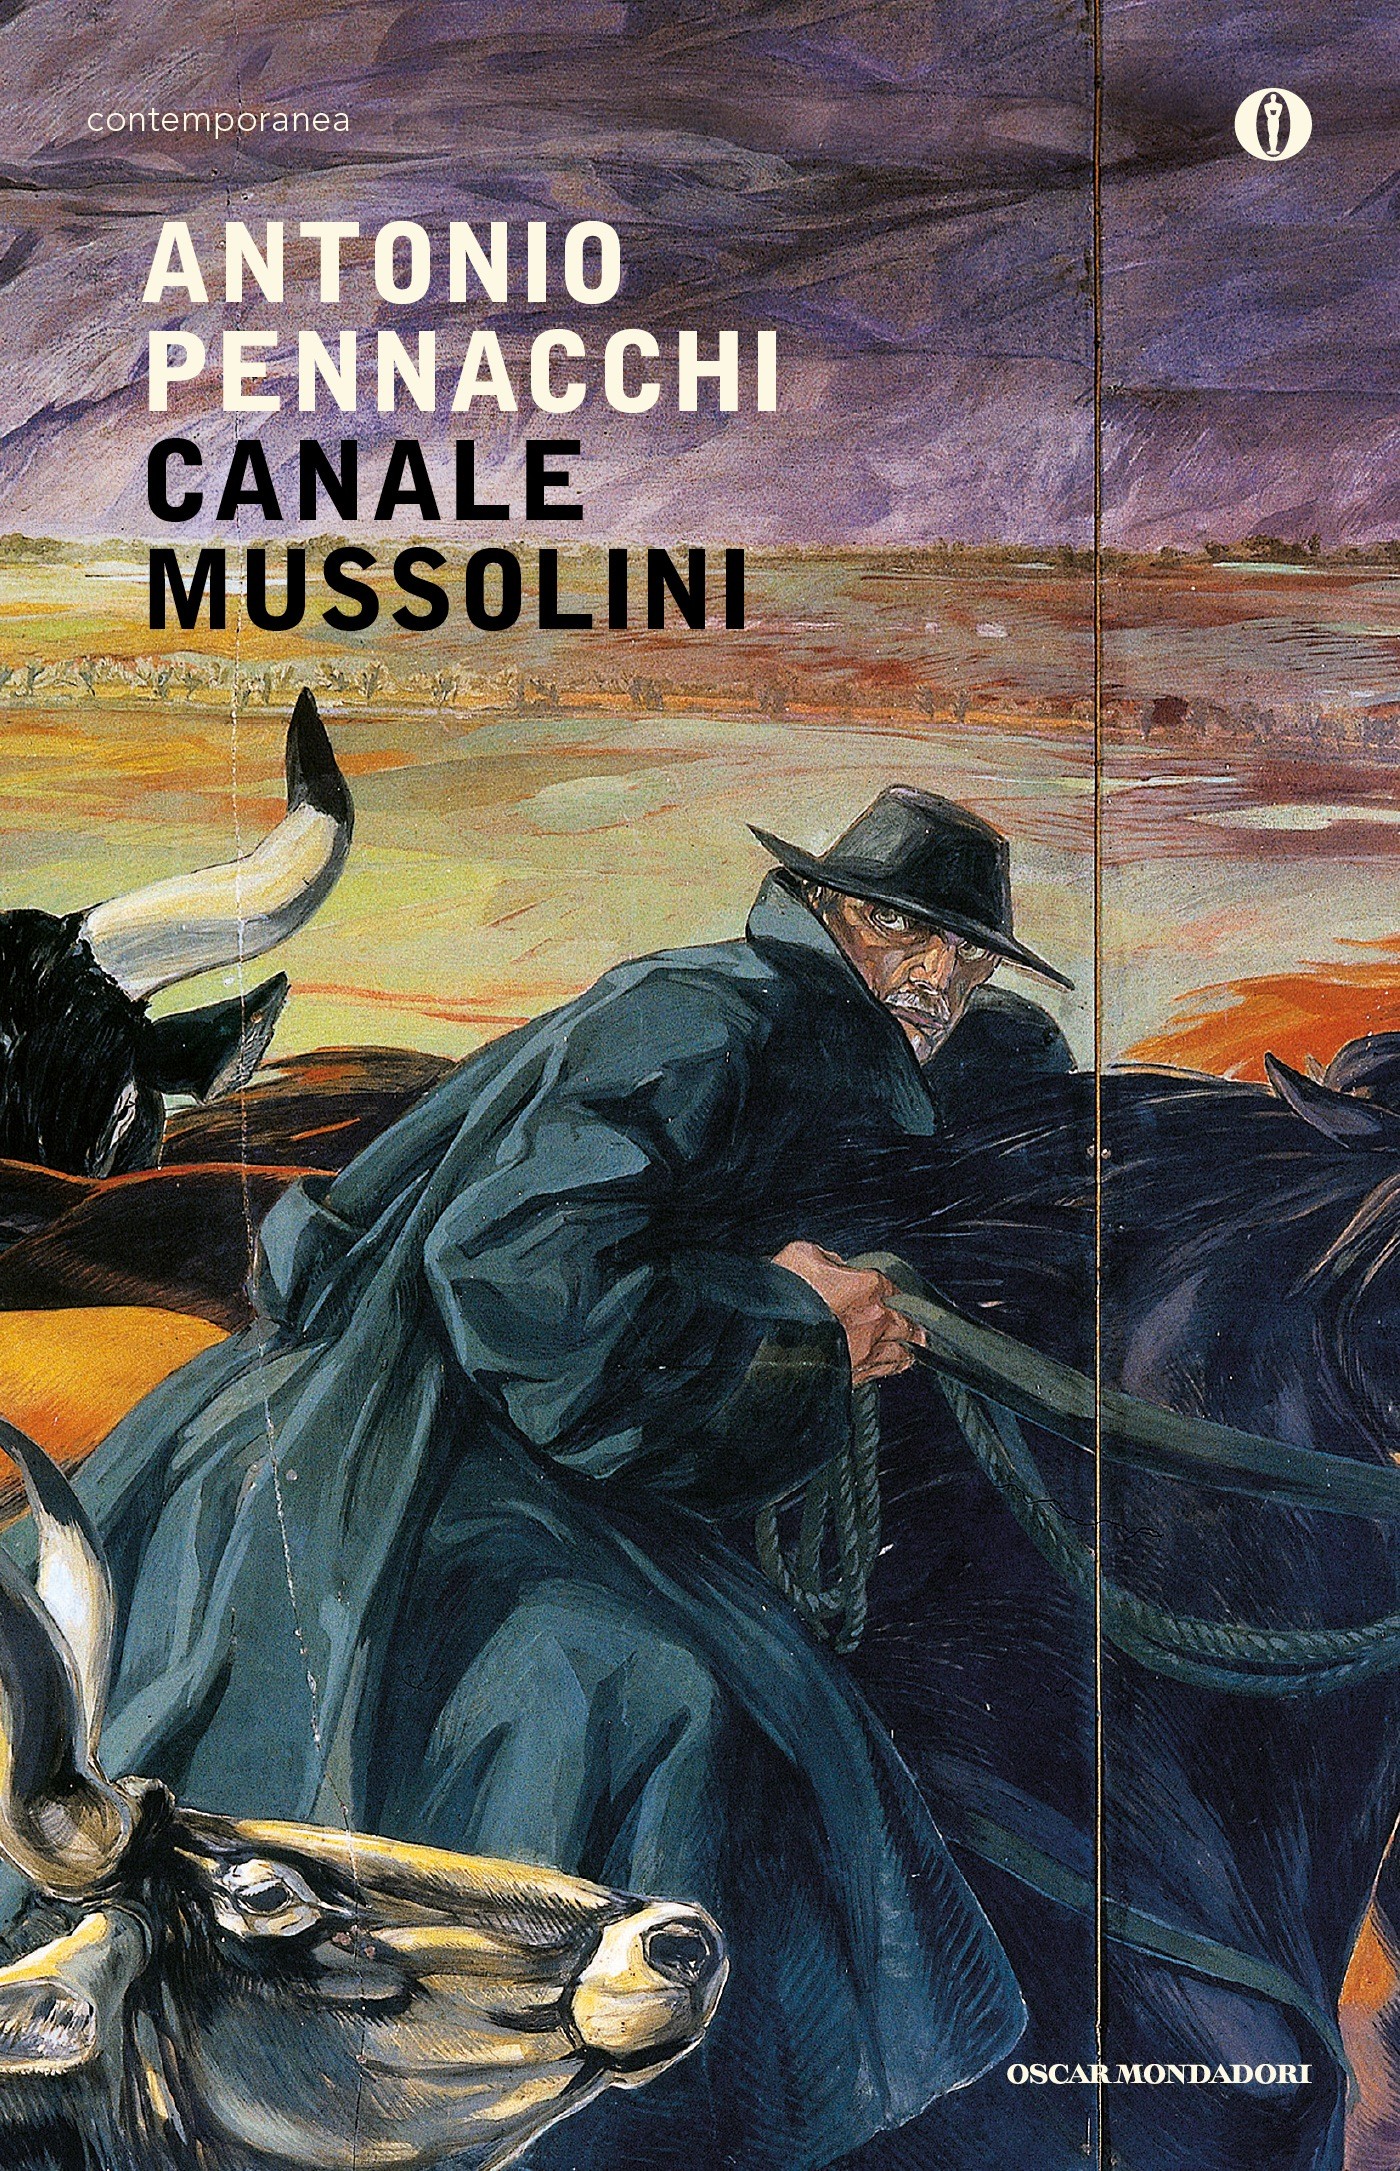 Canale Mussolini - Librerie.coop